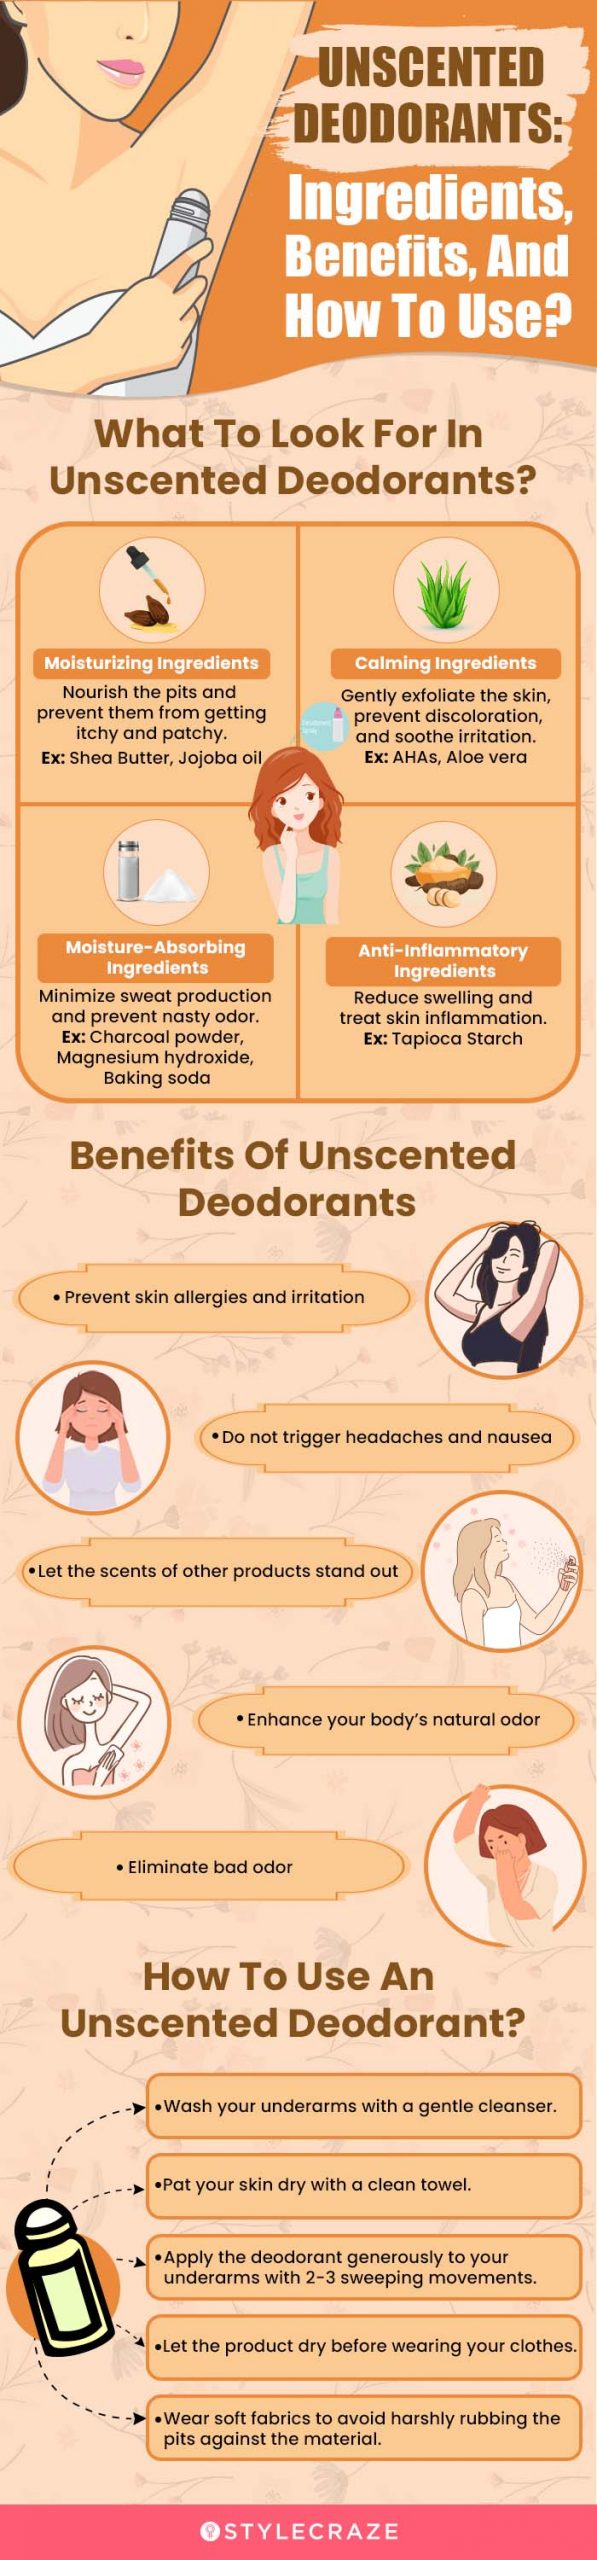 Unscented Deodorants: Ingredients, Benefits, And How To Use